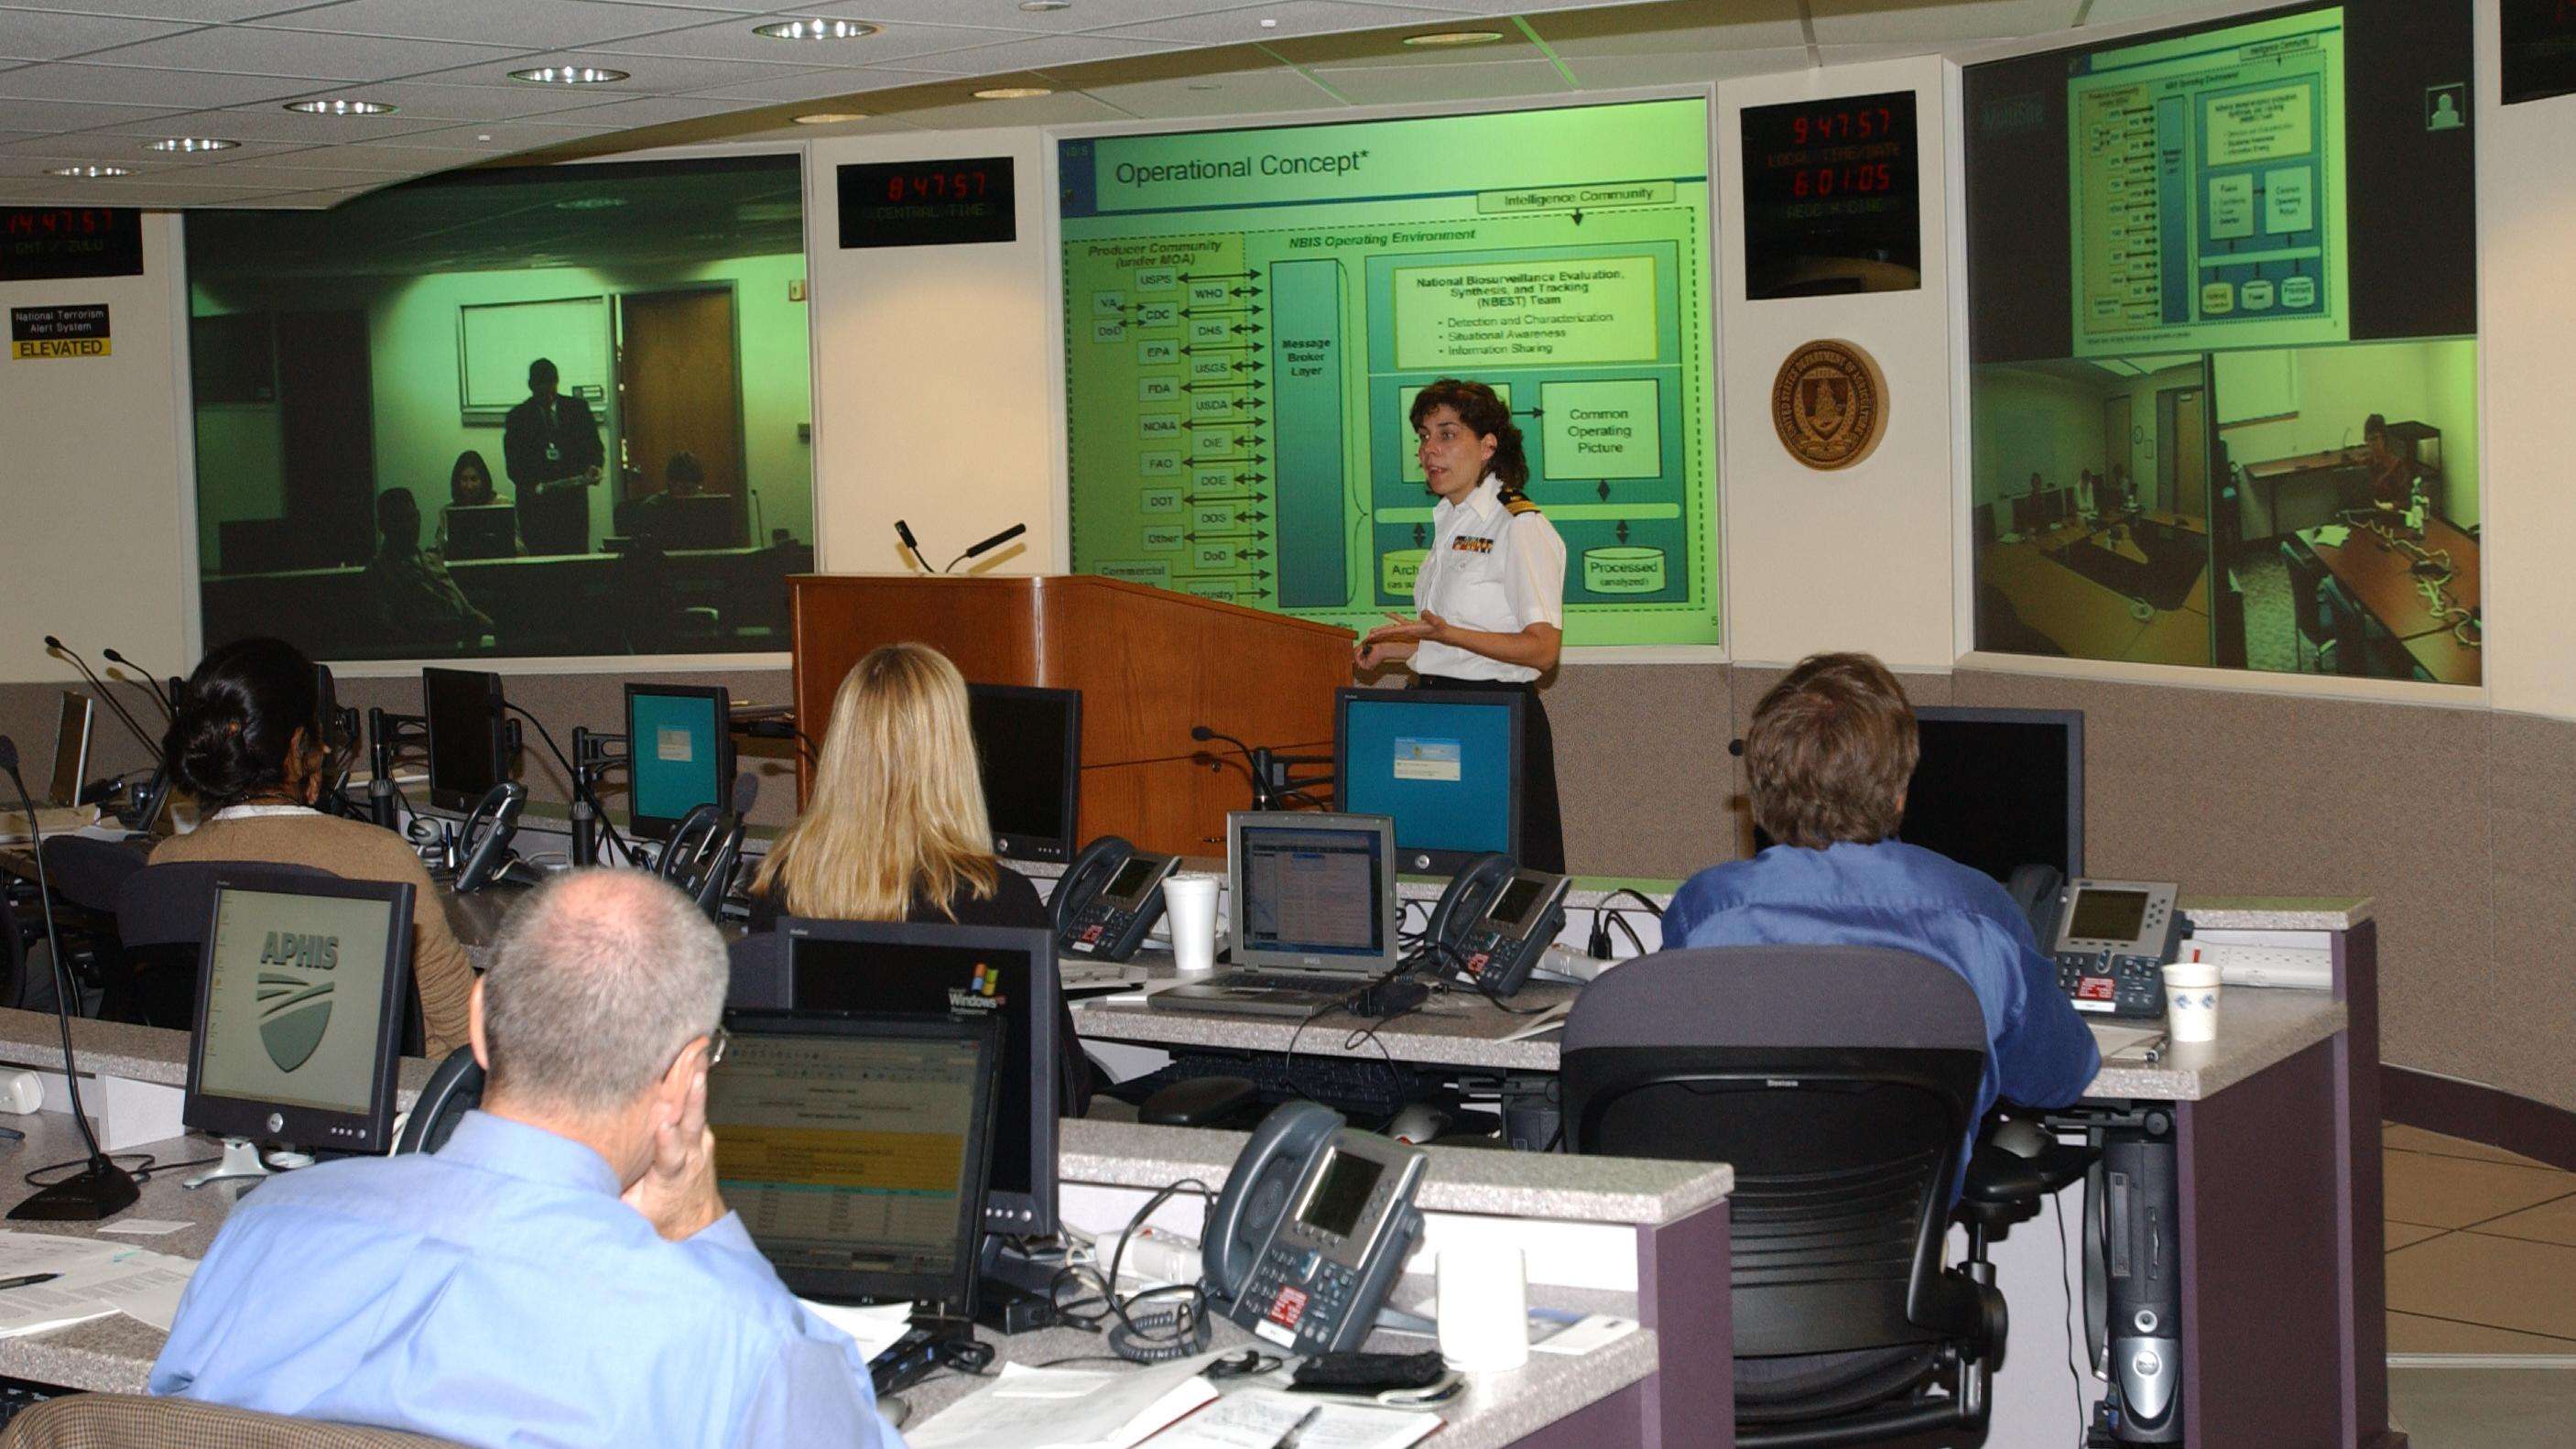 A woman in uniform stands between a podium and projected image titled "operational concept". People sitting in rows of desks with computers and notebooks watch the woman.